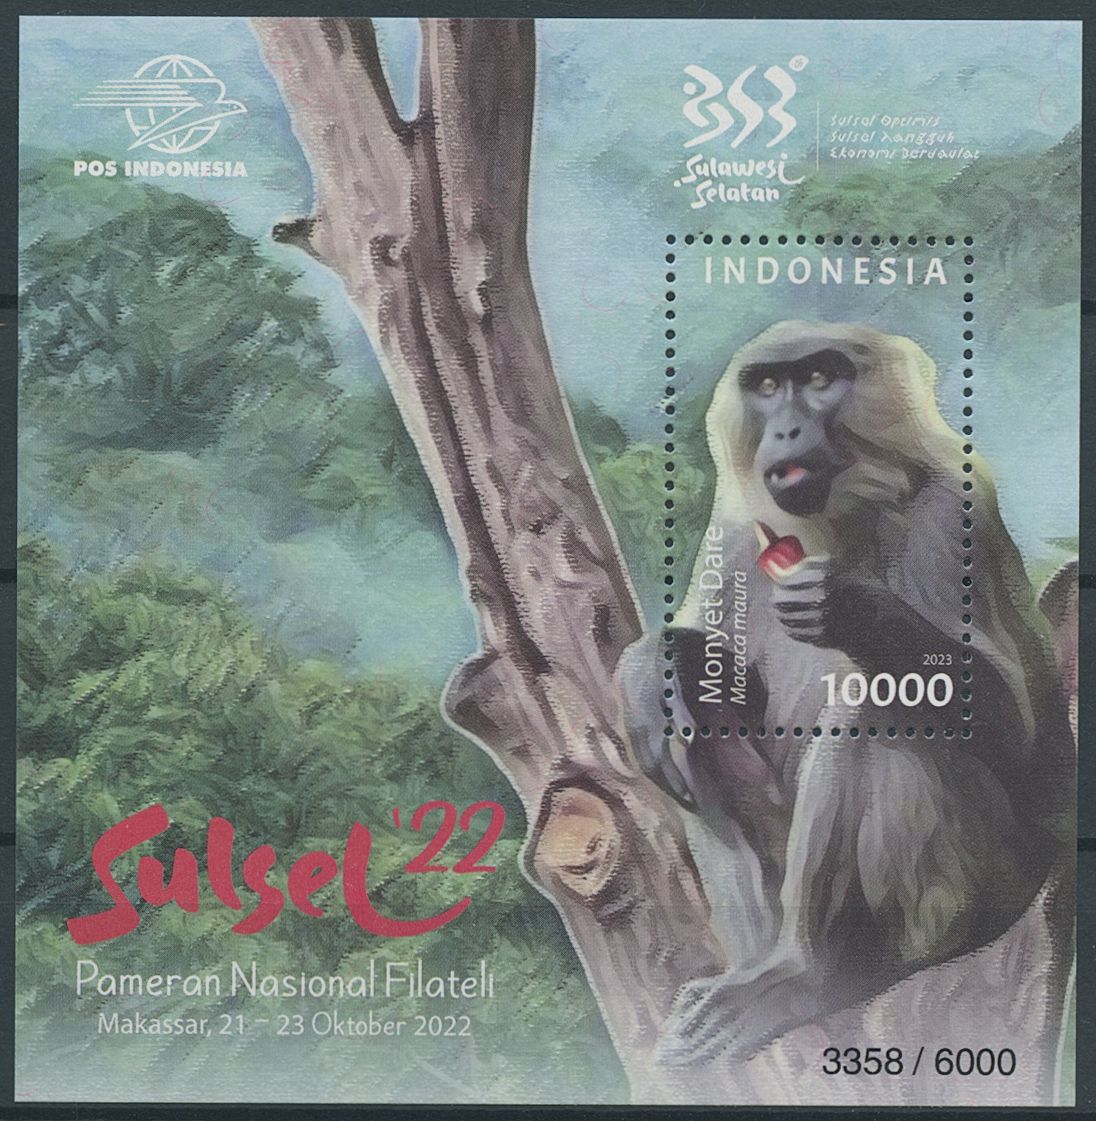 Indonesia 2022 MNH Wild Animals Stamps Sulsel '22 Moor Macaques Monkeys Primates Stamp Shows 1v M/S